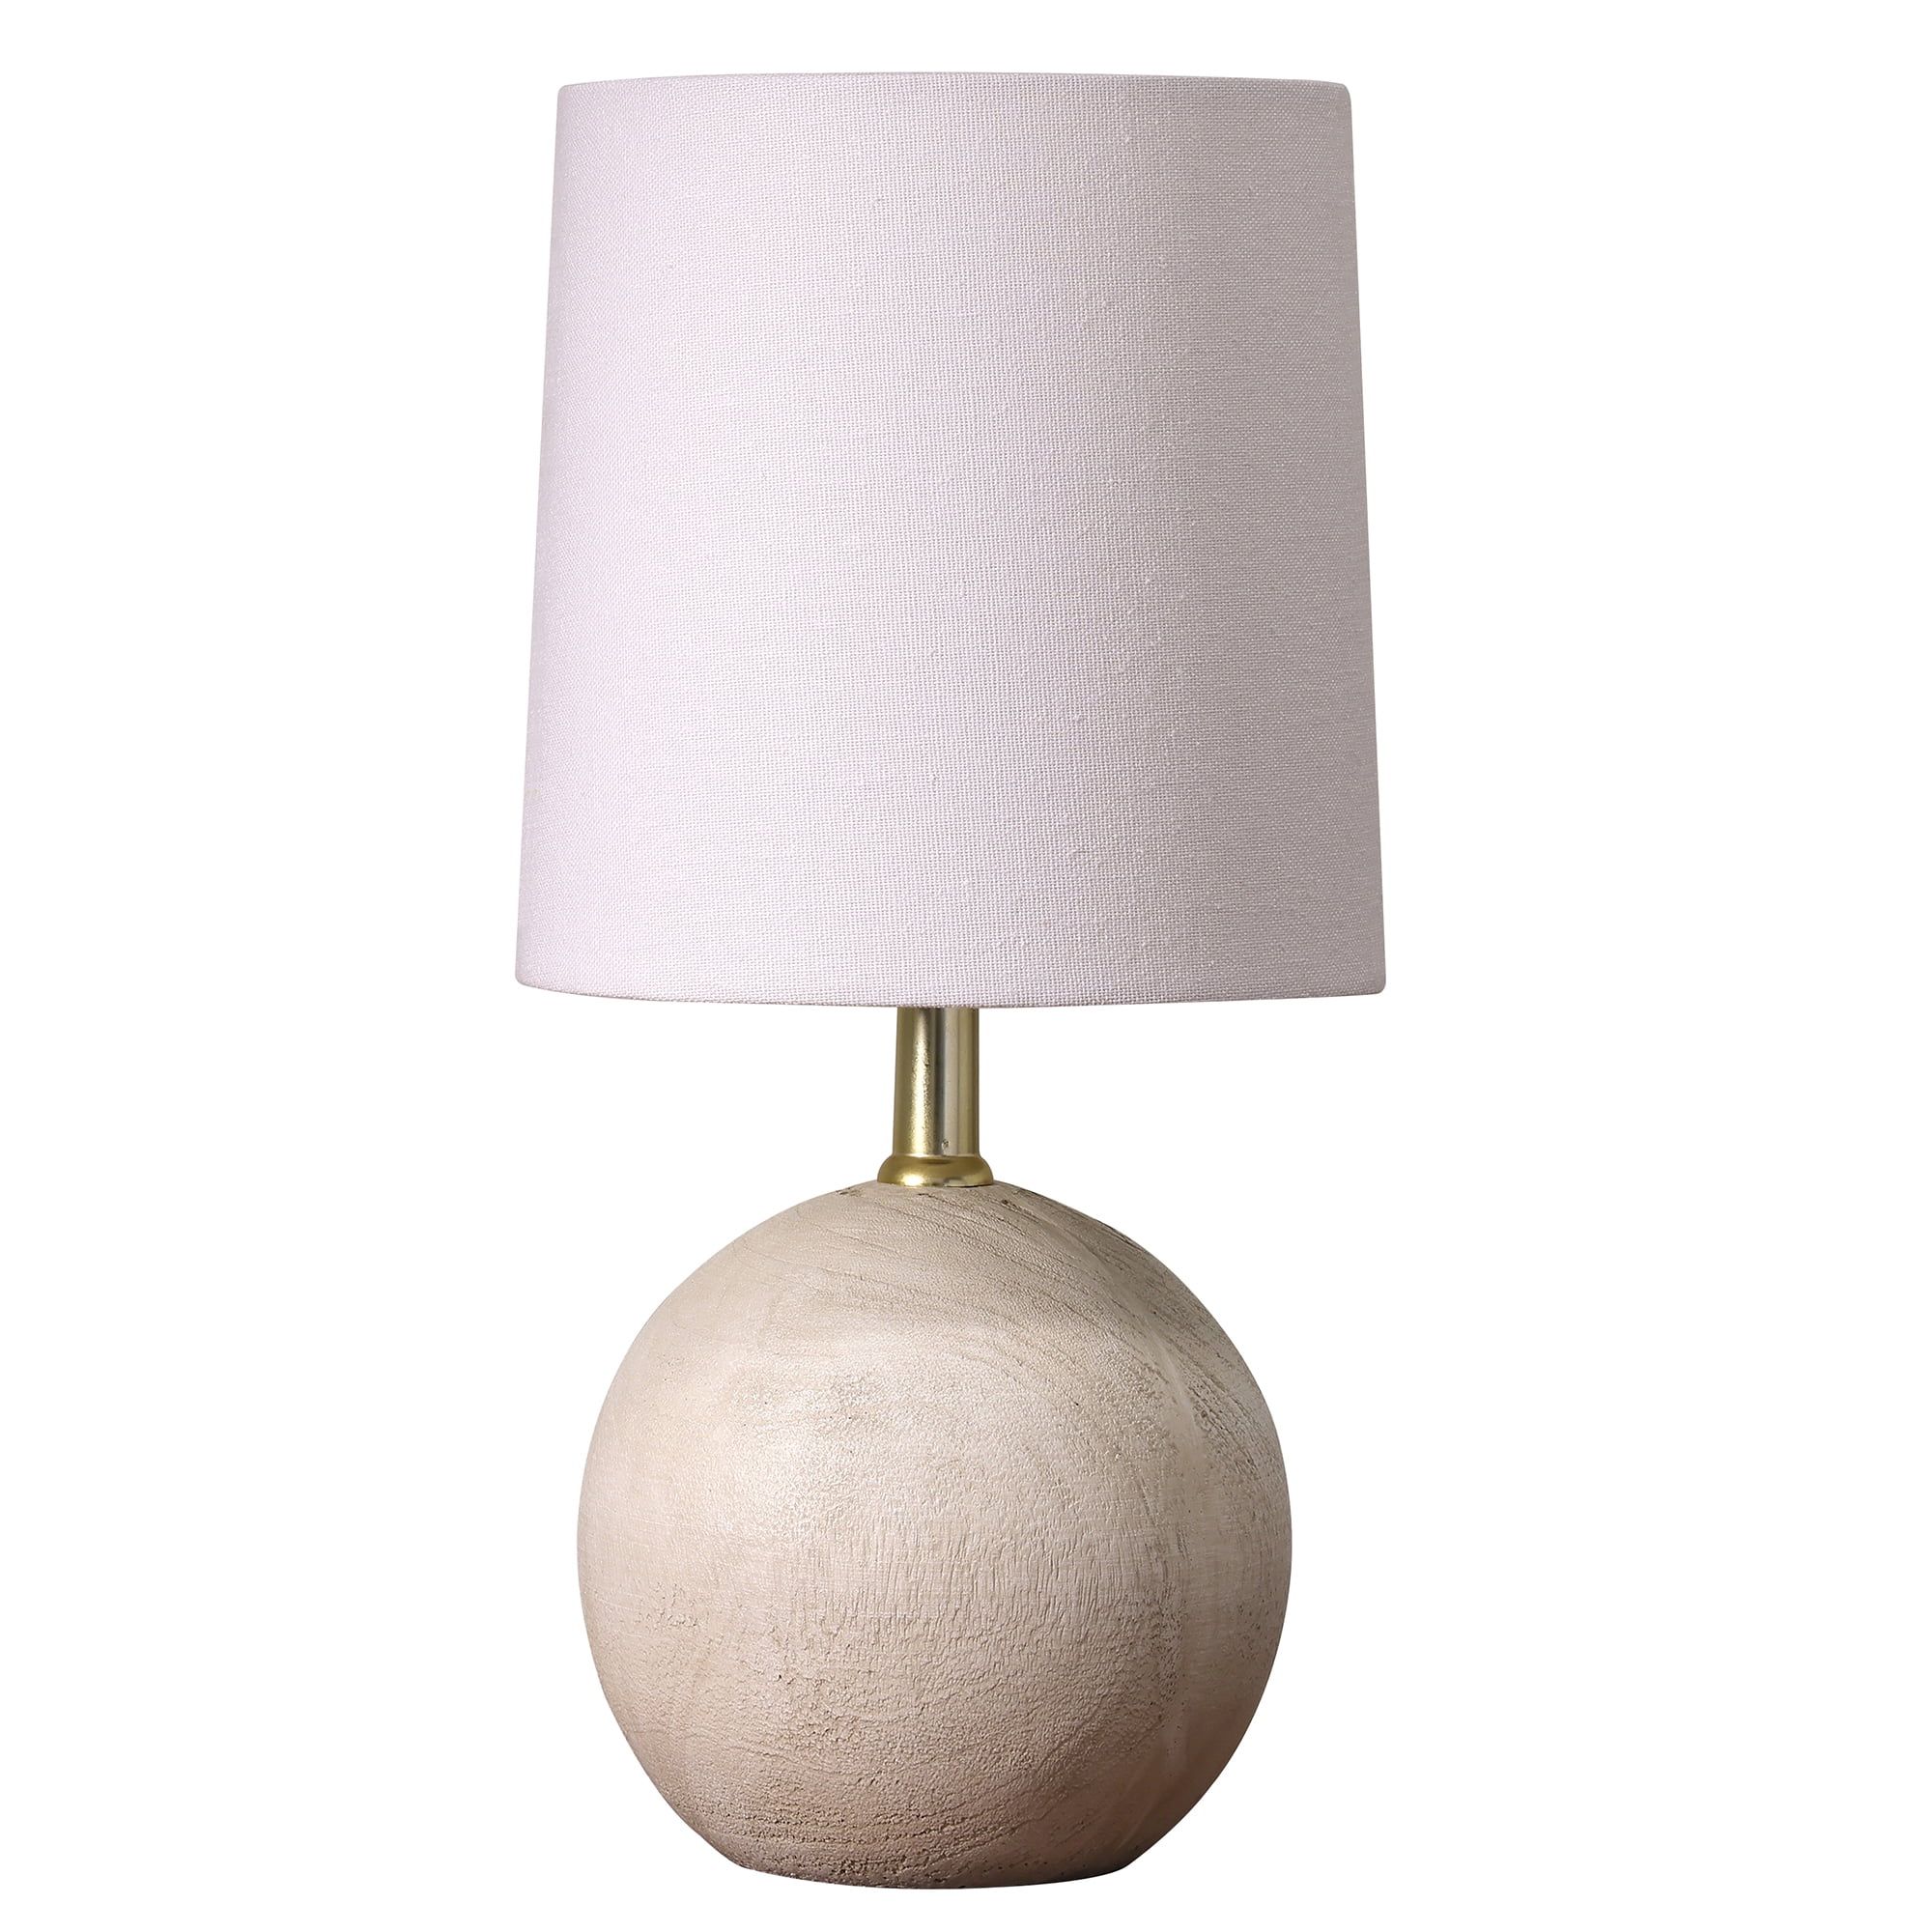 Xtreme Lit Mini Ball Natural Grey Resin Lamp with White Fabric Shade, LED Light Bulb Not Included | Walmart (US)